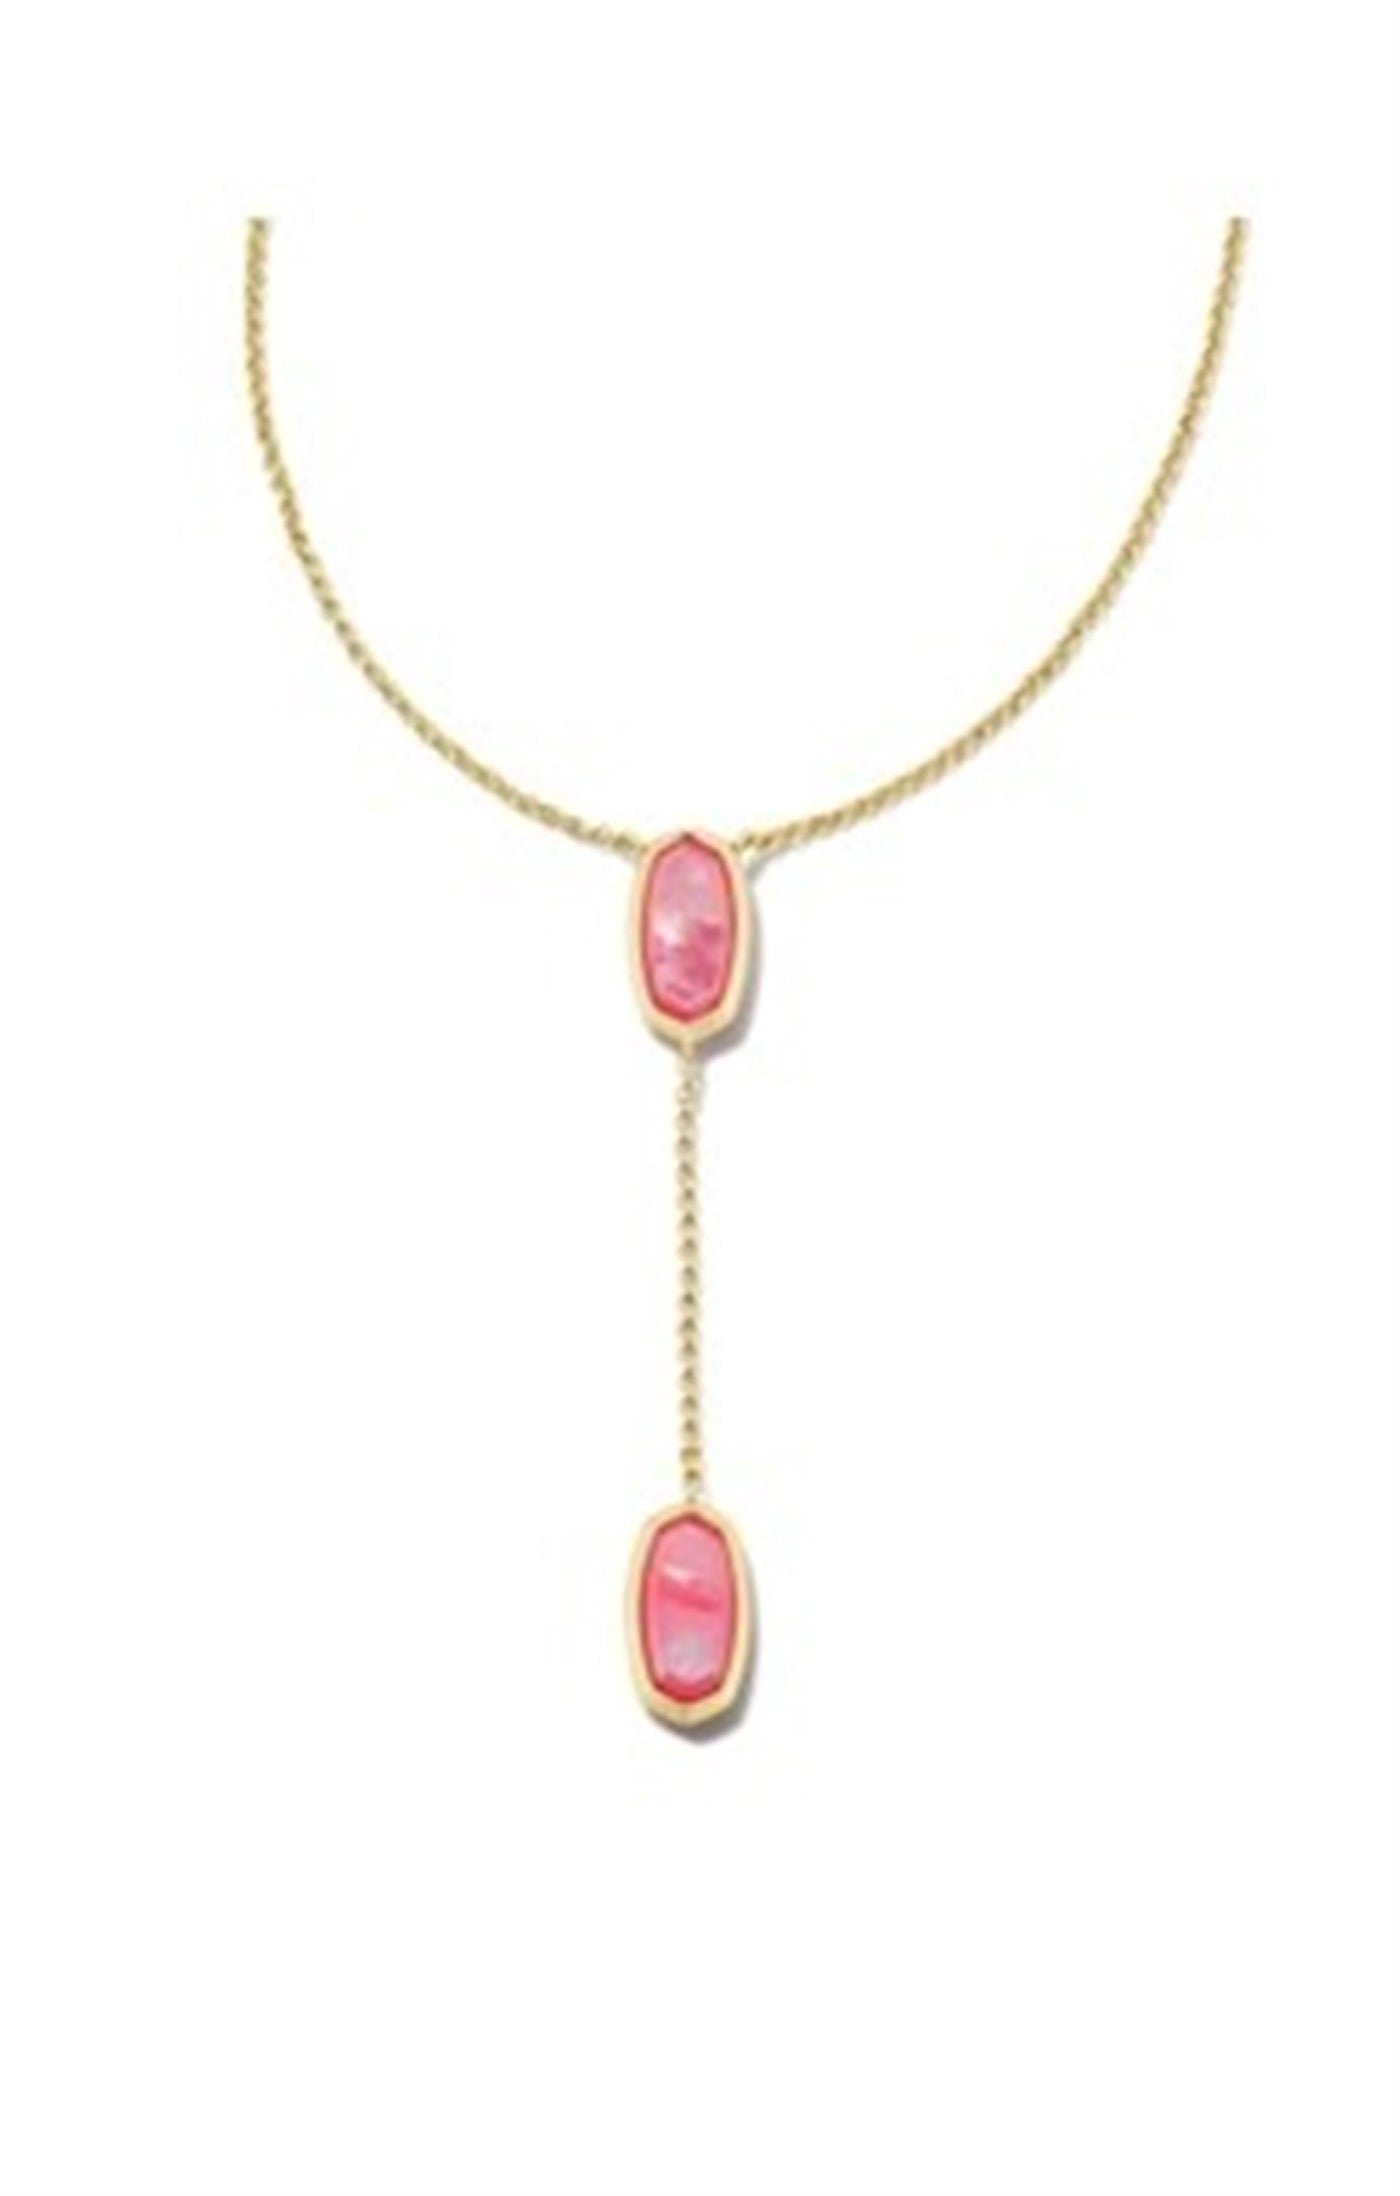 Gold Tone Necklace Featuring Pink Mother of Pearl by Kendra Scott